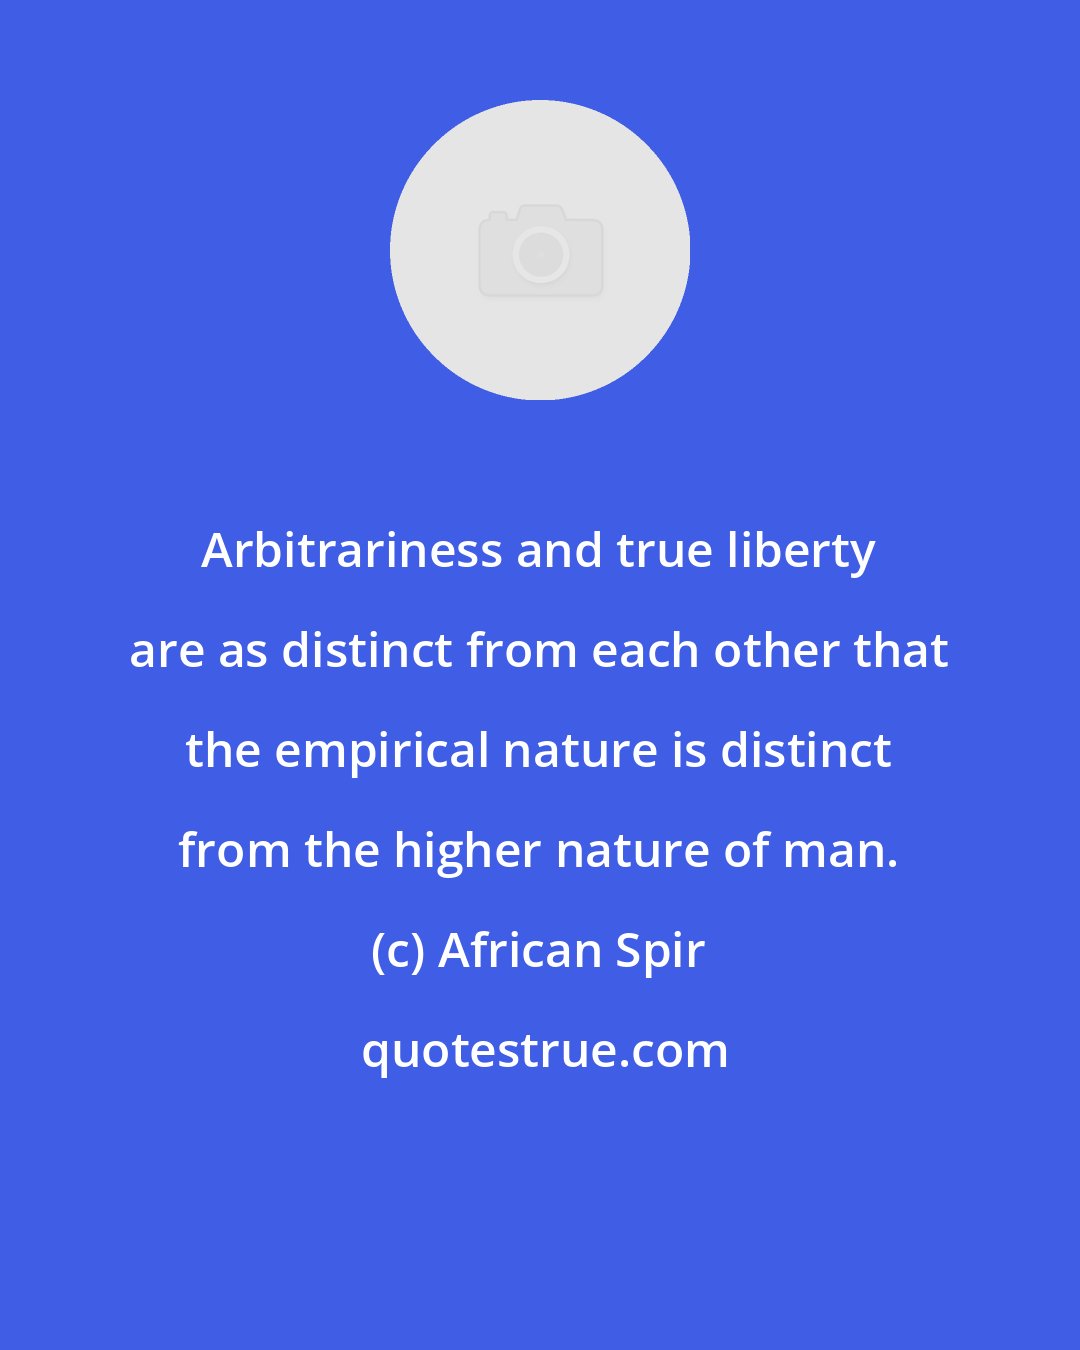 African Spir: Arbitrariness and true liberty are as distinct from each other that the empirical nature is distinct from the higher nature of man.